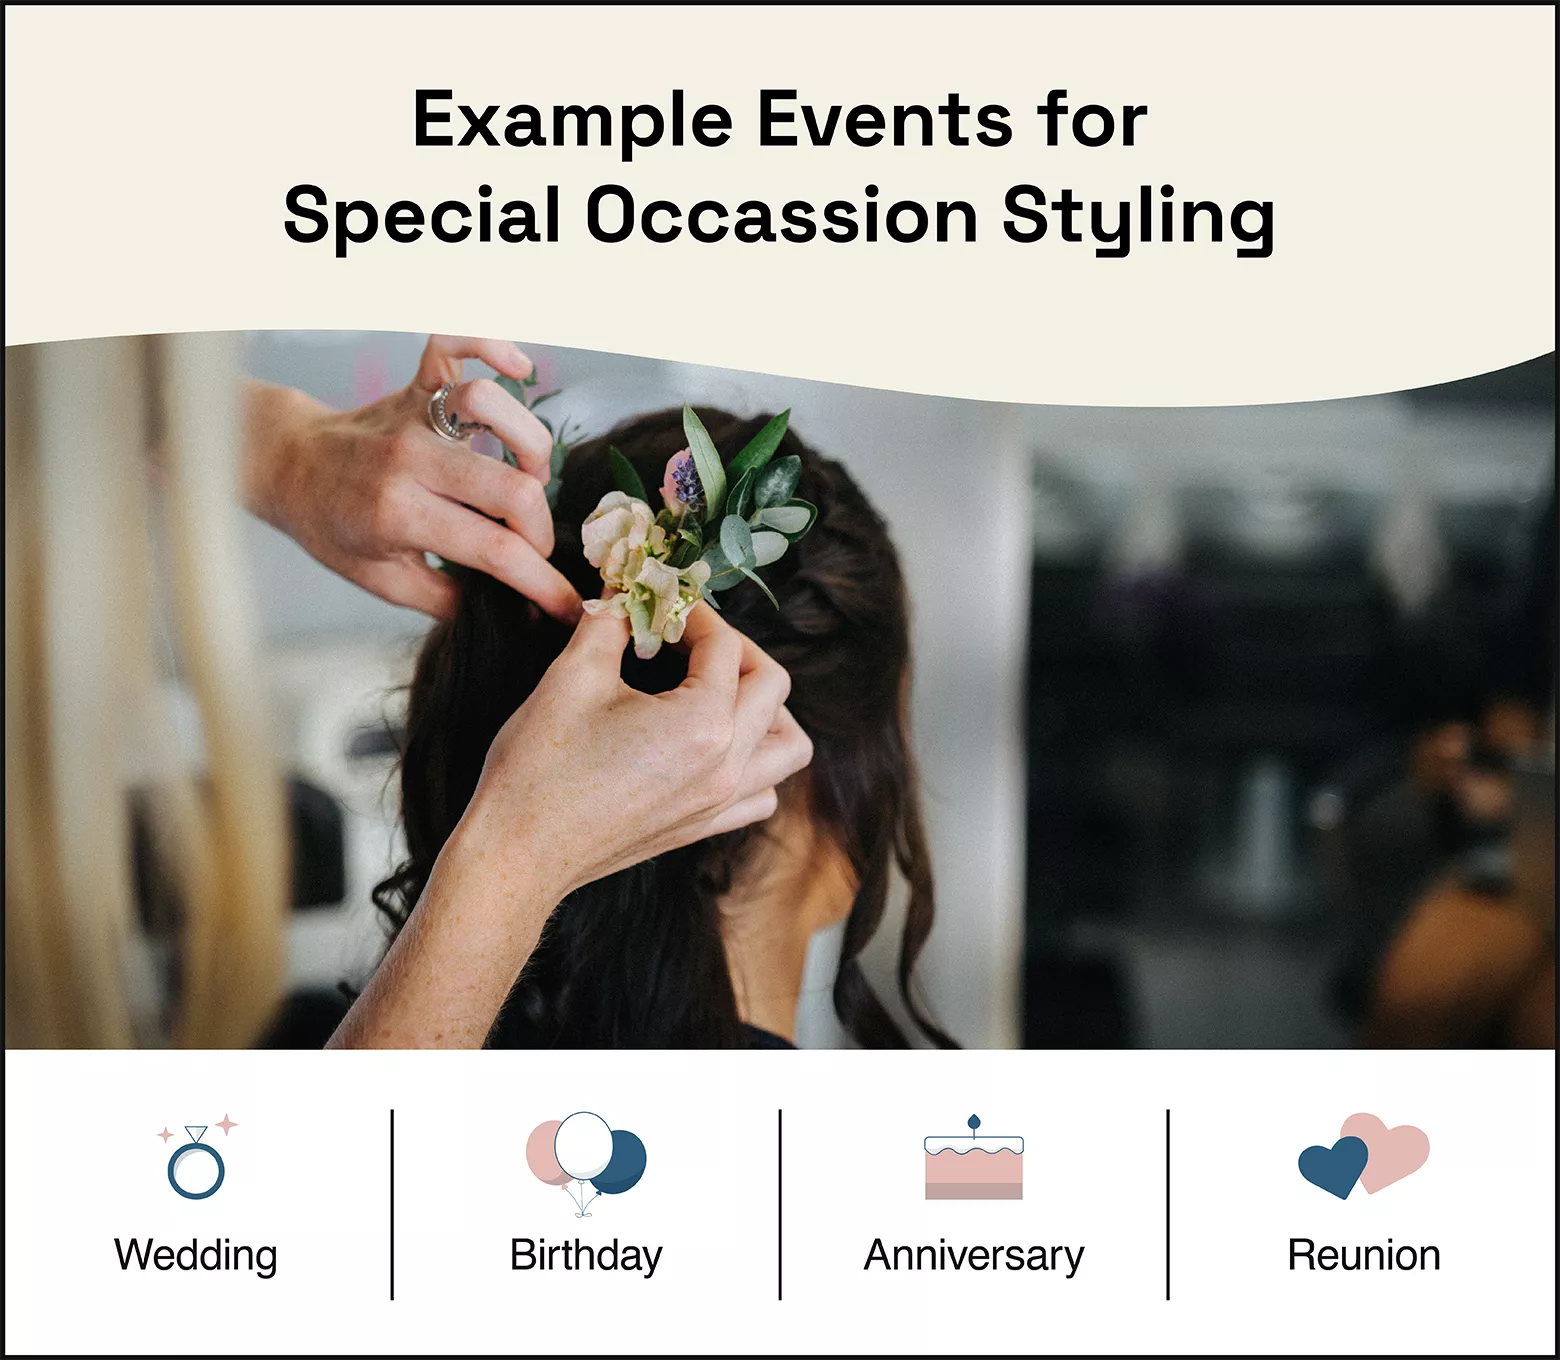 photo of person with brunette hair getting flowers and foliage placed hair by stylist, text and iconography along the bottom summarizing examples of special occasion styling